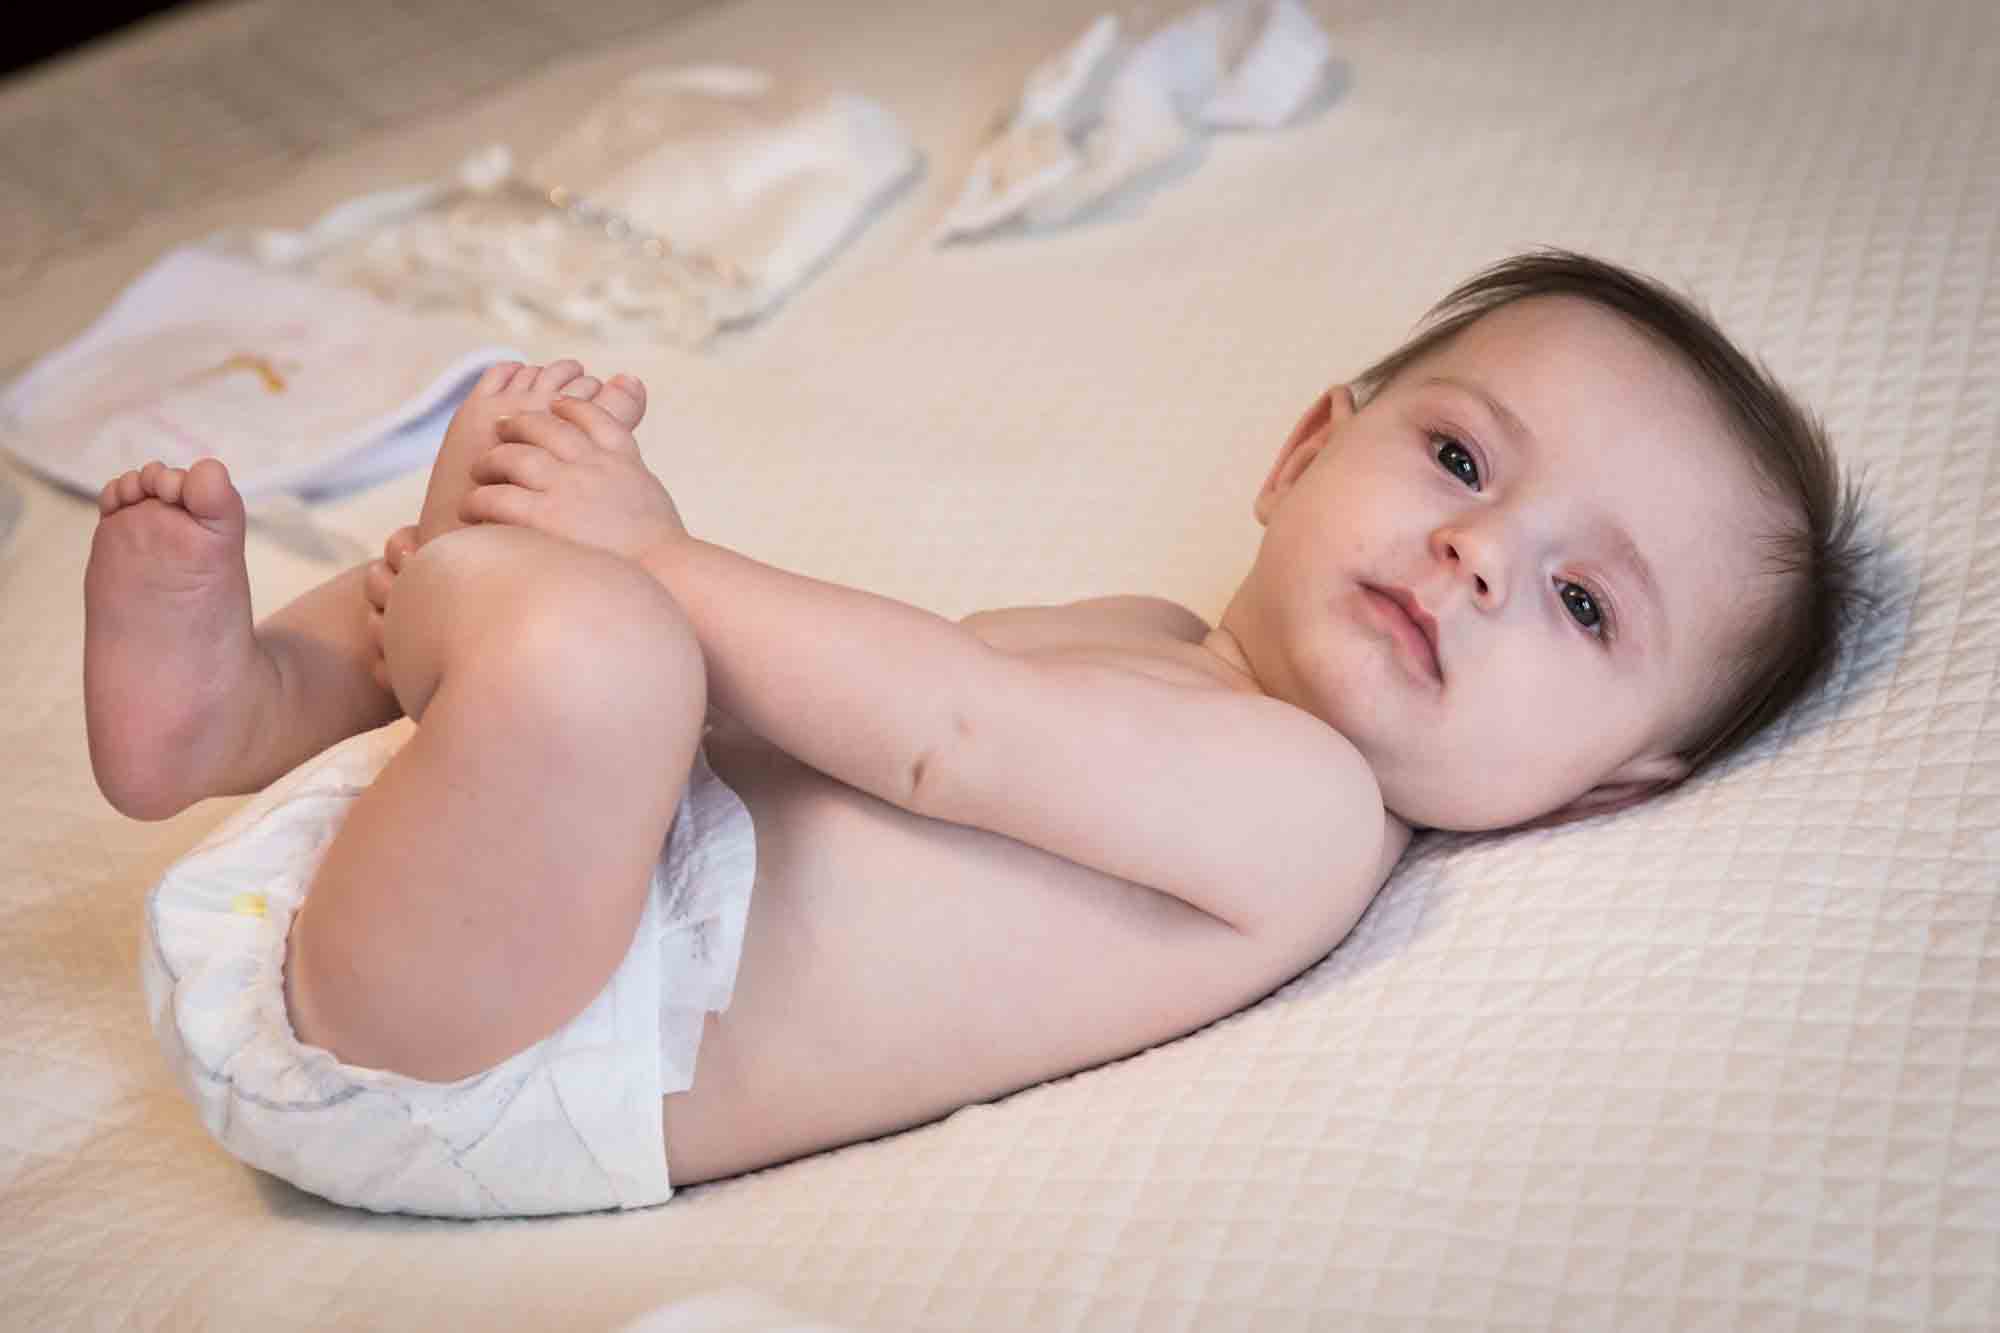 Naked baby wearing diaper on white bedspread